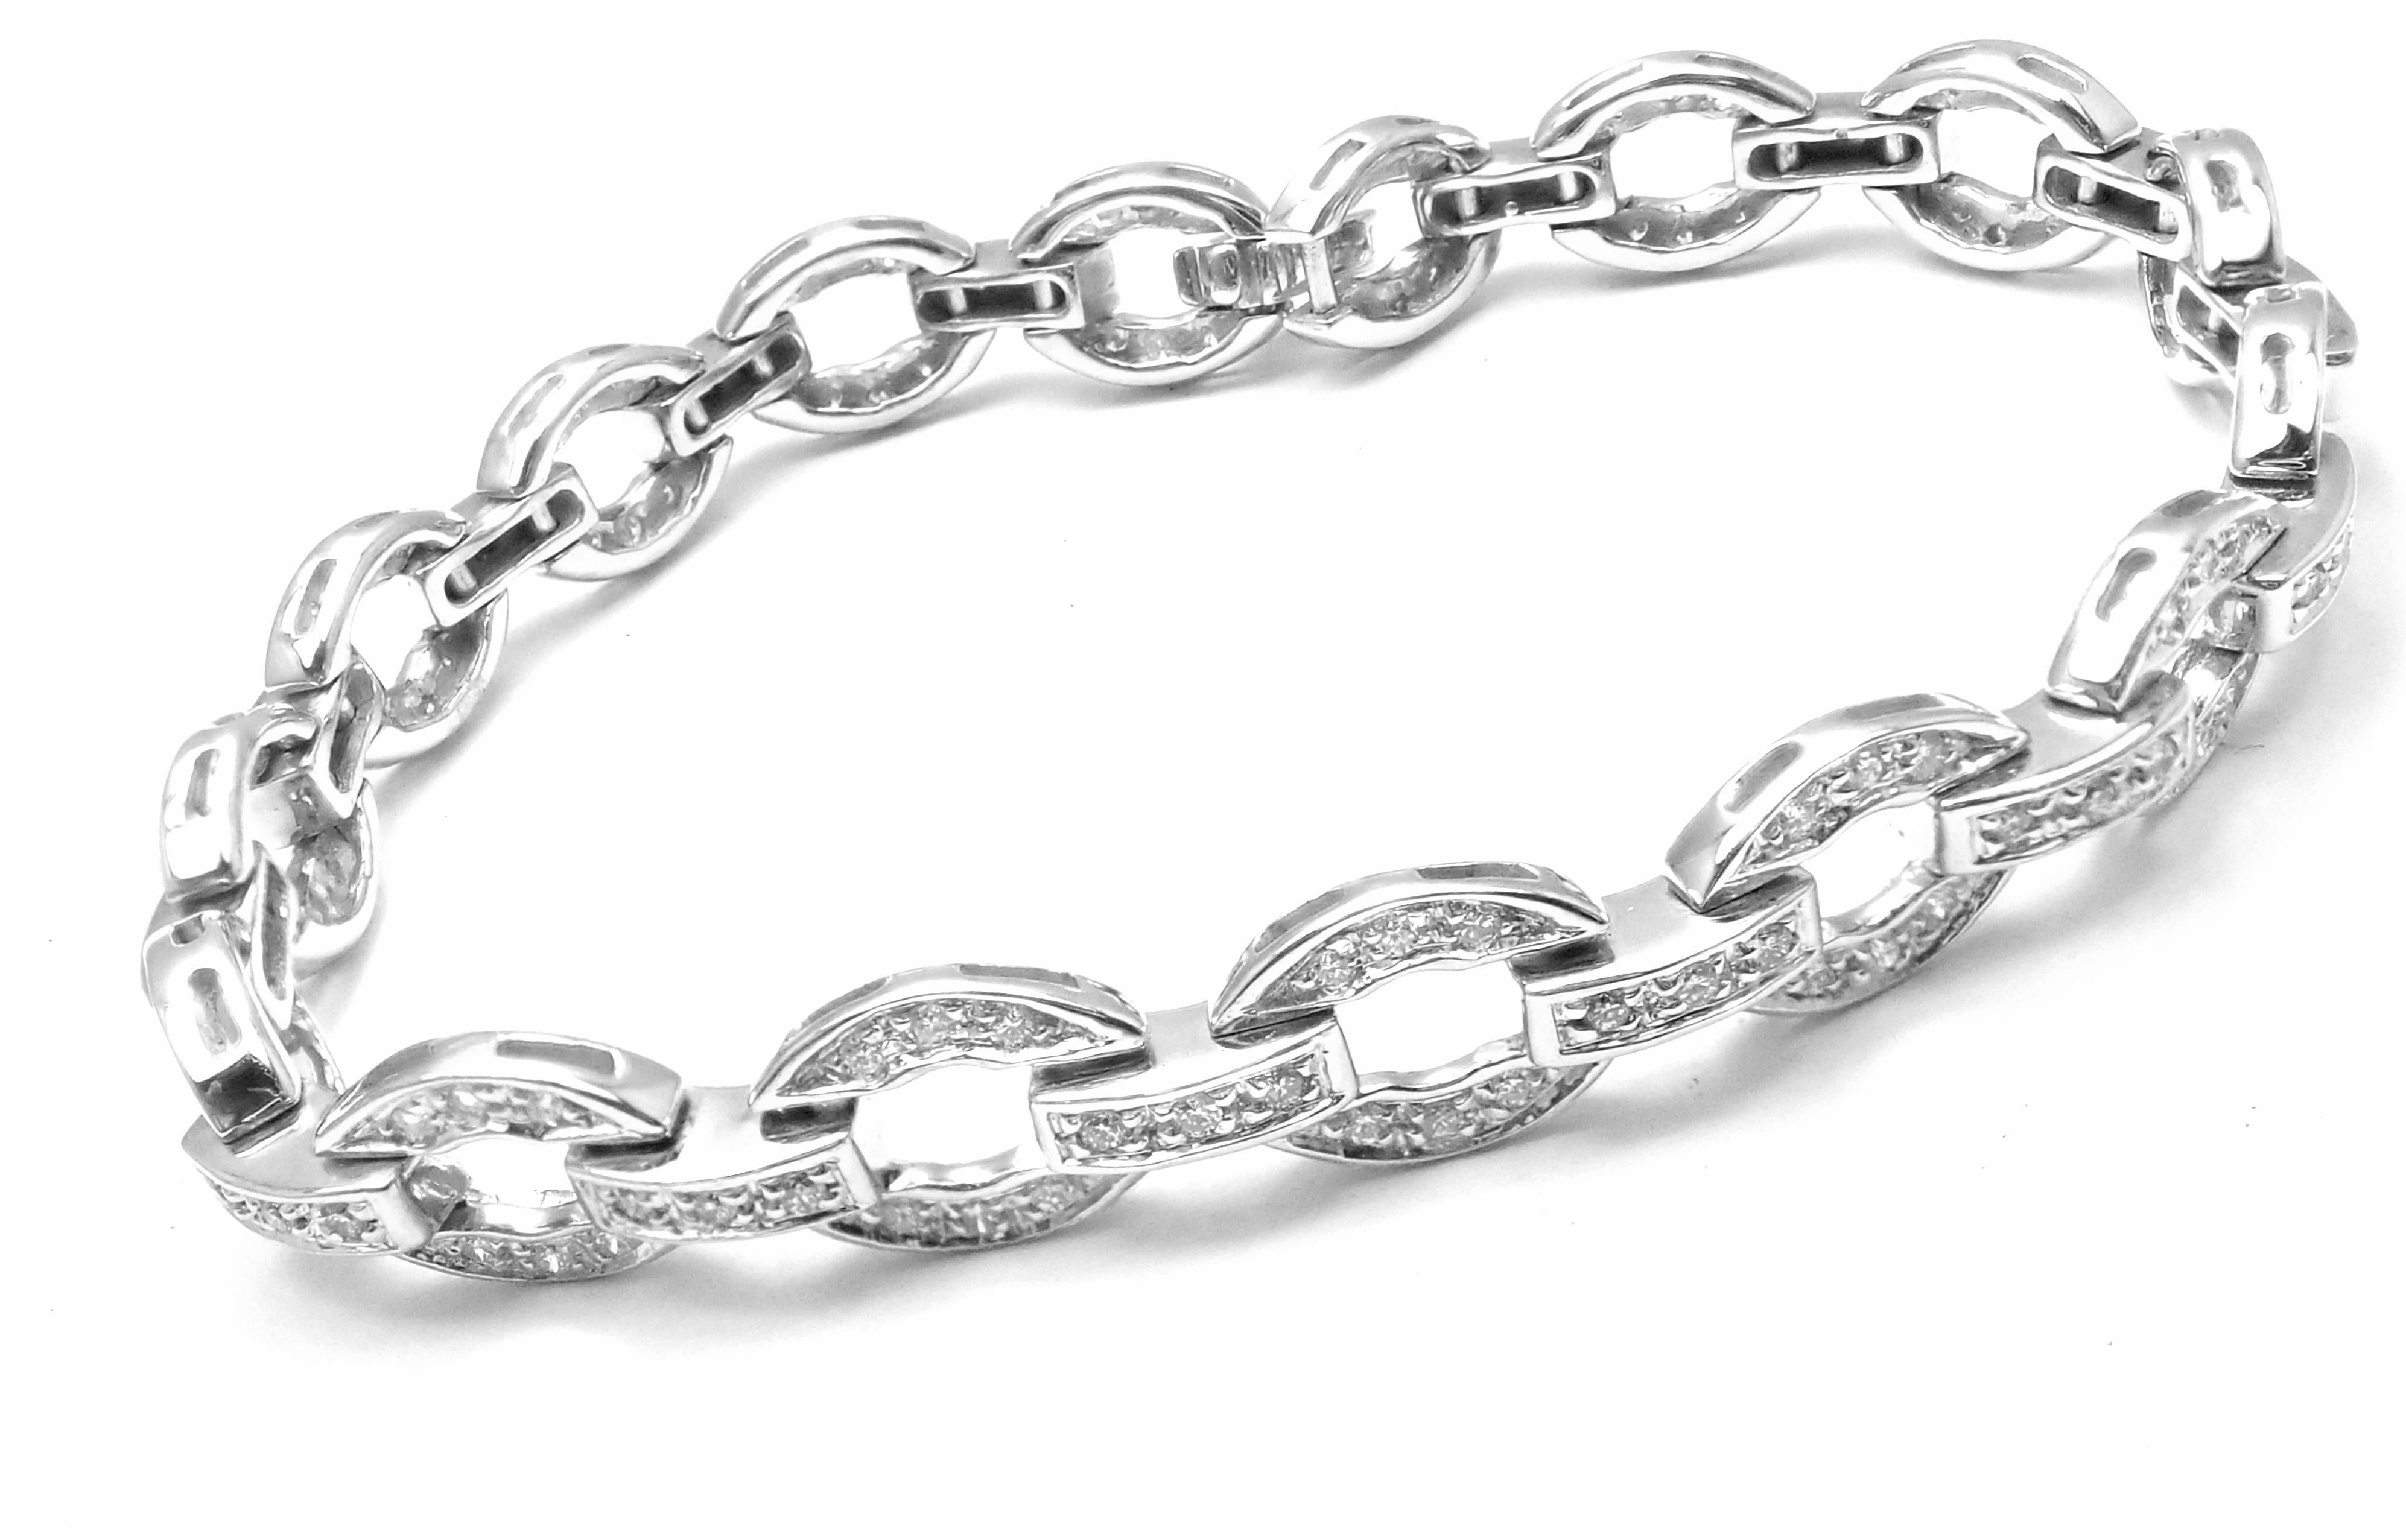 18k White Gold Diamond Tennis Bracelet by Damiani.
With Round brilliant cut diamonds E-G color, VS-SI clarity total weight approx. 1.02ct  
This necklace comes with Box, Certificate.
Details:
Measurements: Length: 7